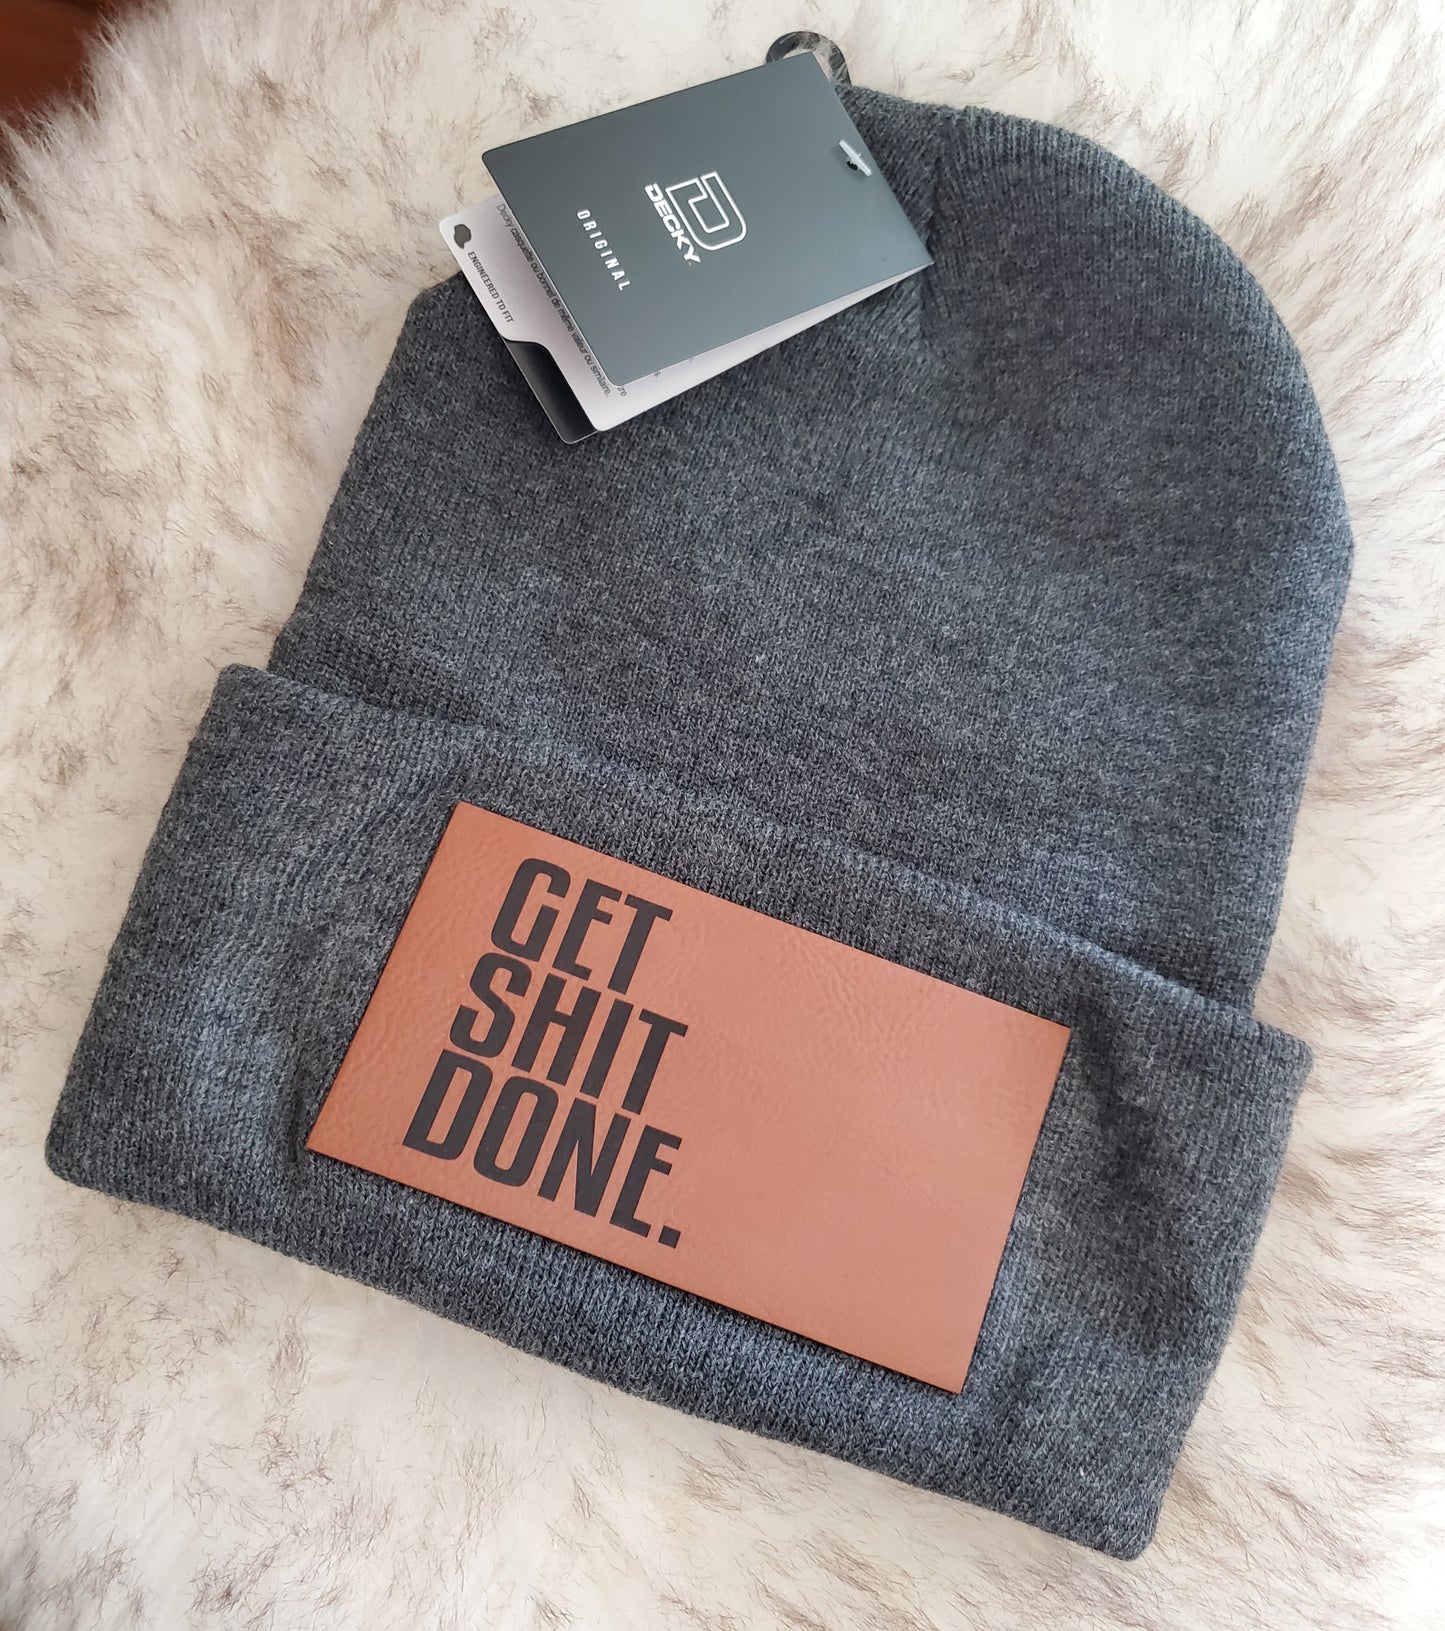 Get Shit Done Beanie - Charcoal Gray with Leather Patch -OSFM